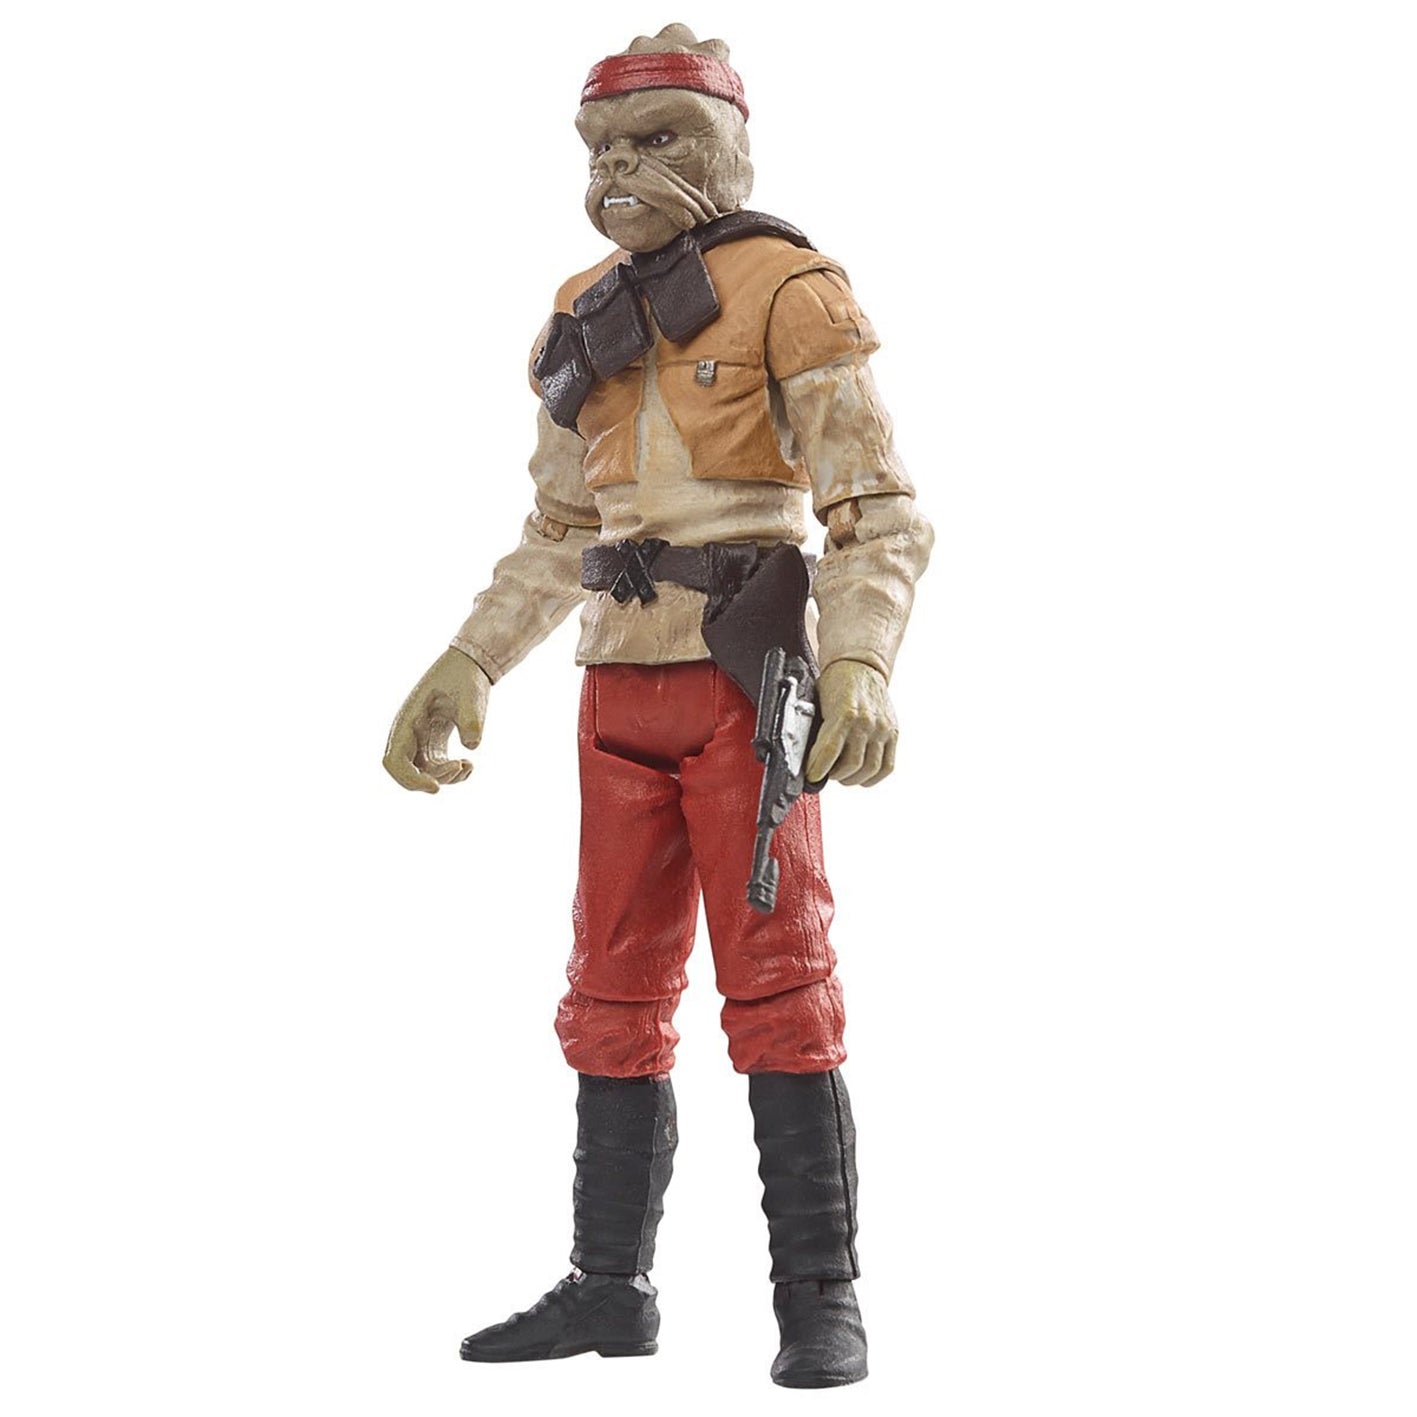 Kithaba (Skiff Guard), Star Wars: The Vintage Collection